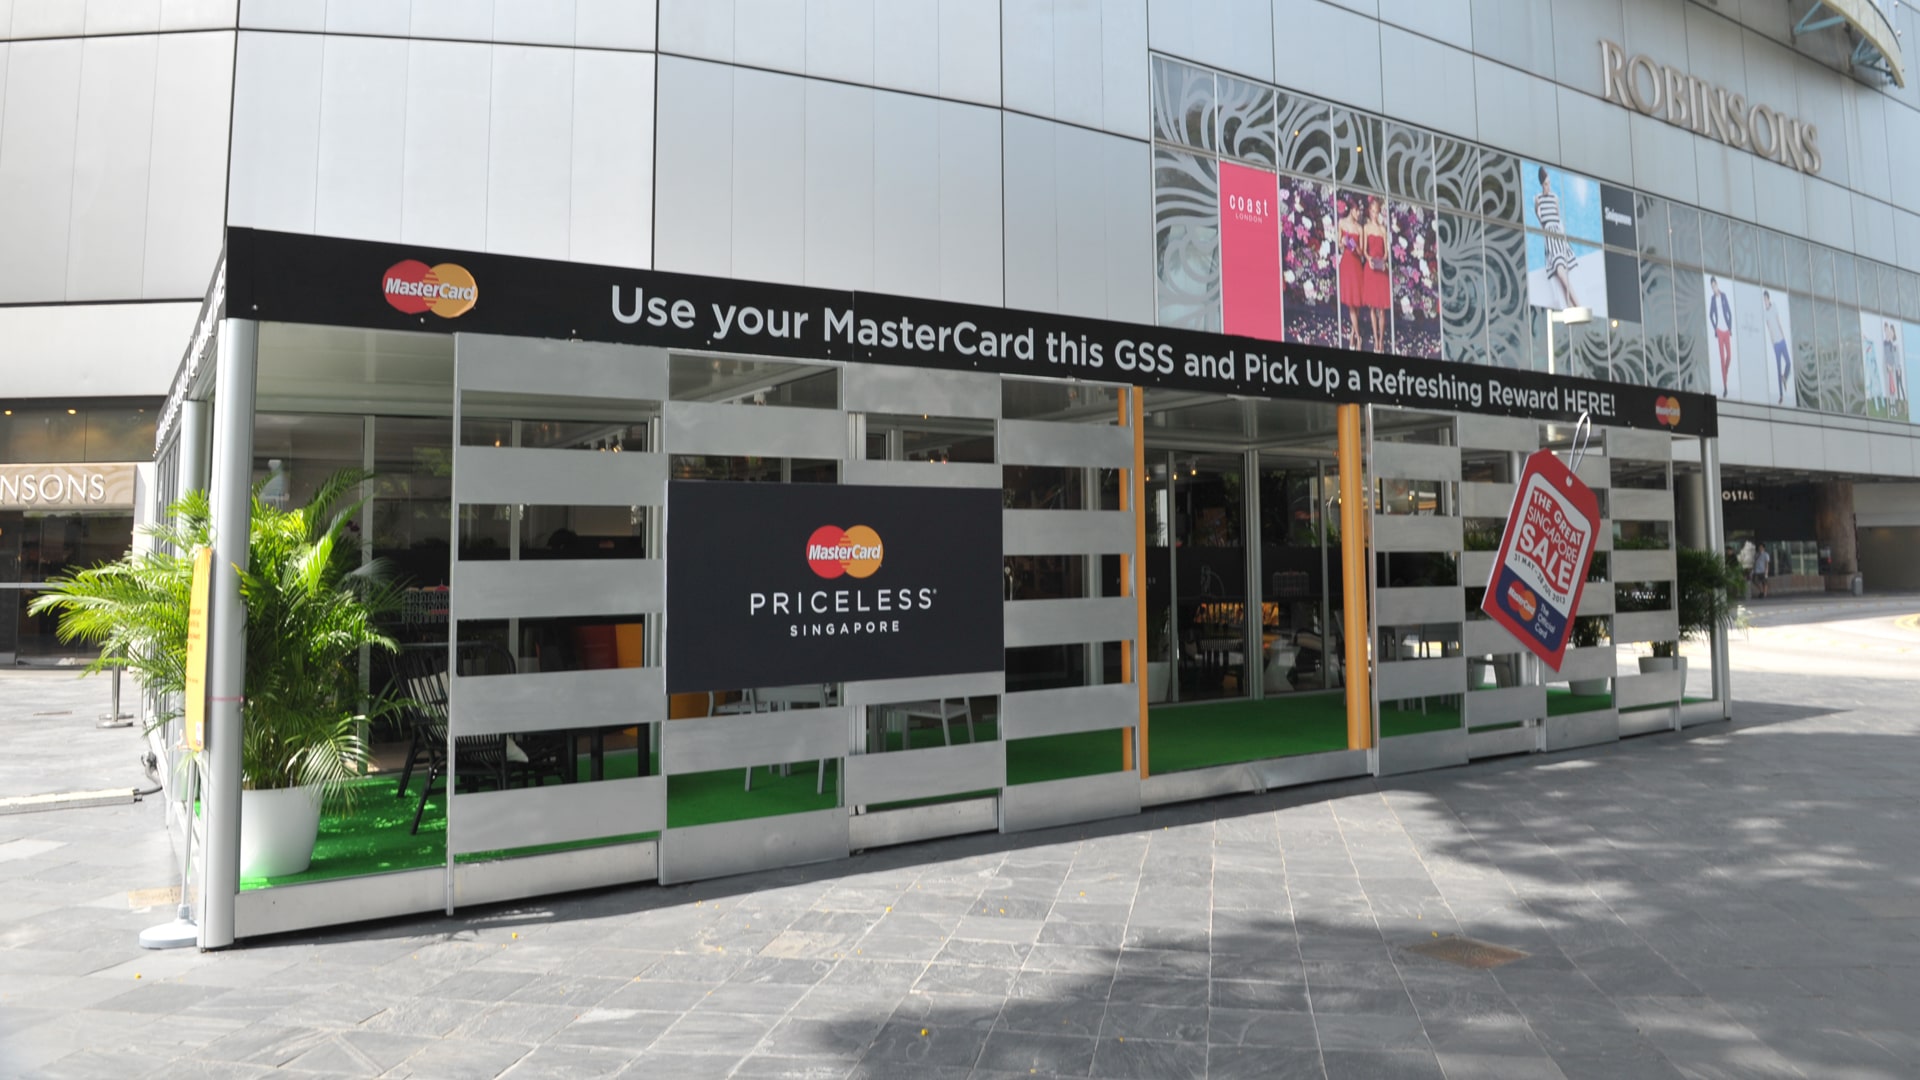 tsc_opt-images_tubelar-system_mastercard-pop-up-store-1920x1080-01-min